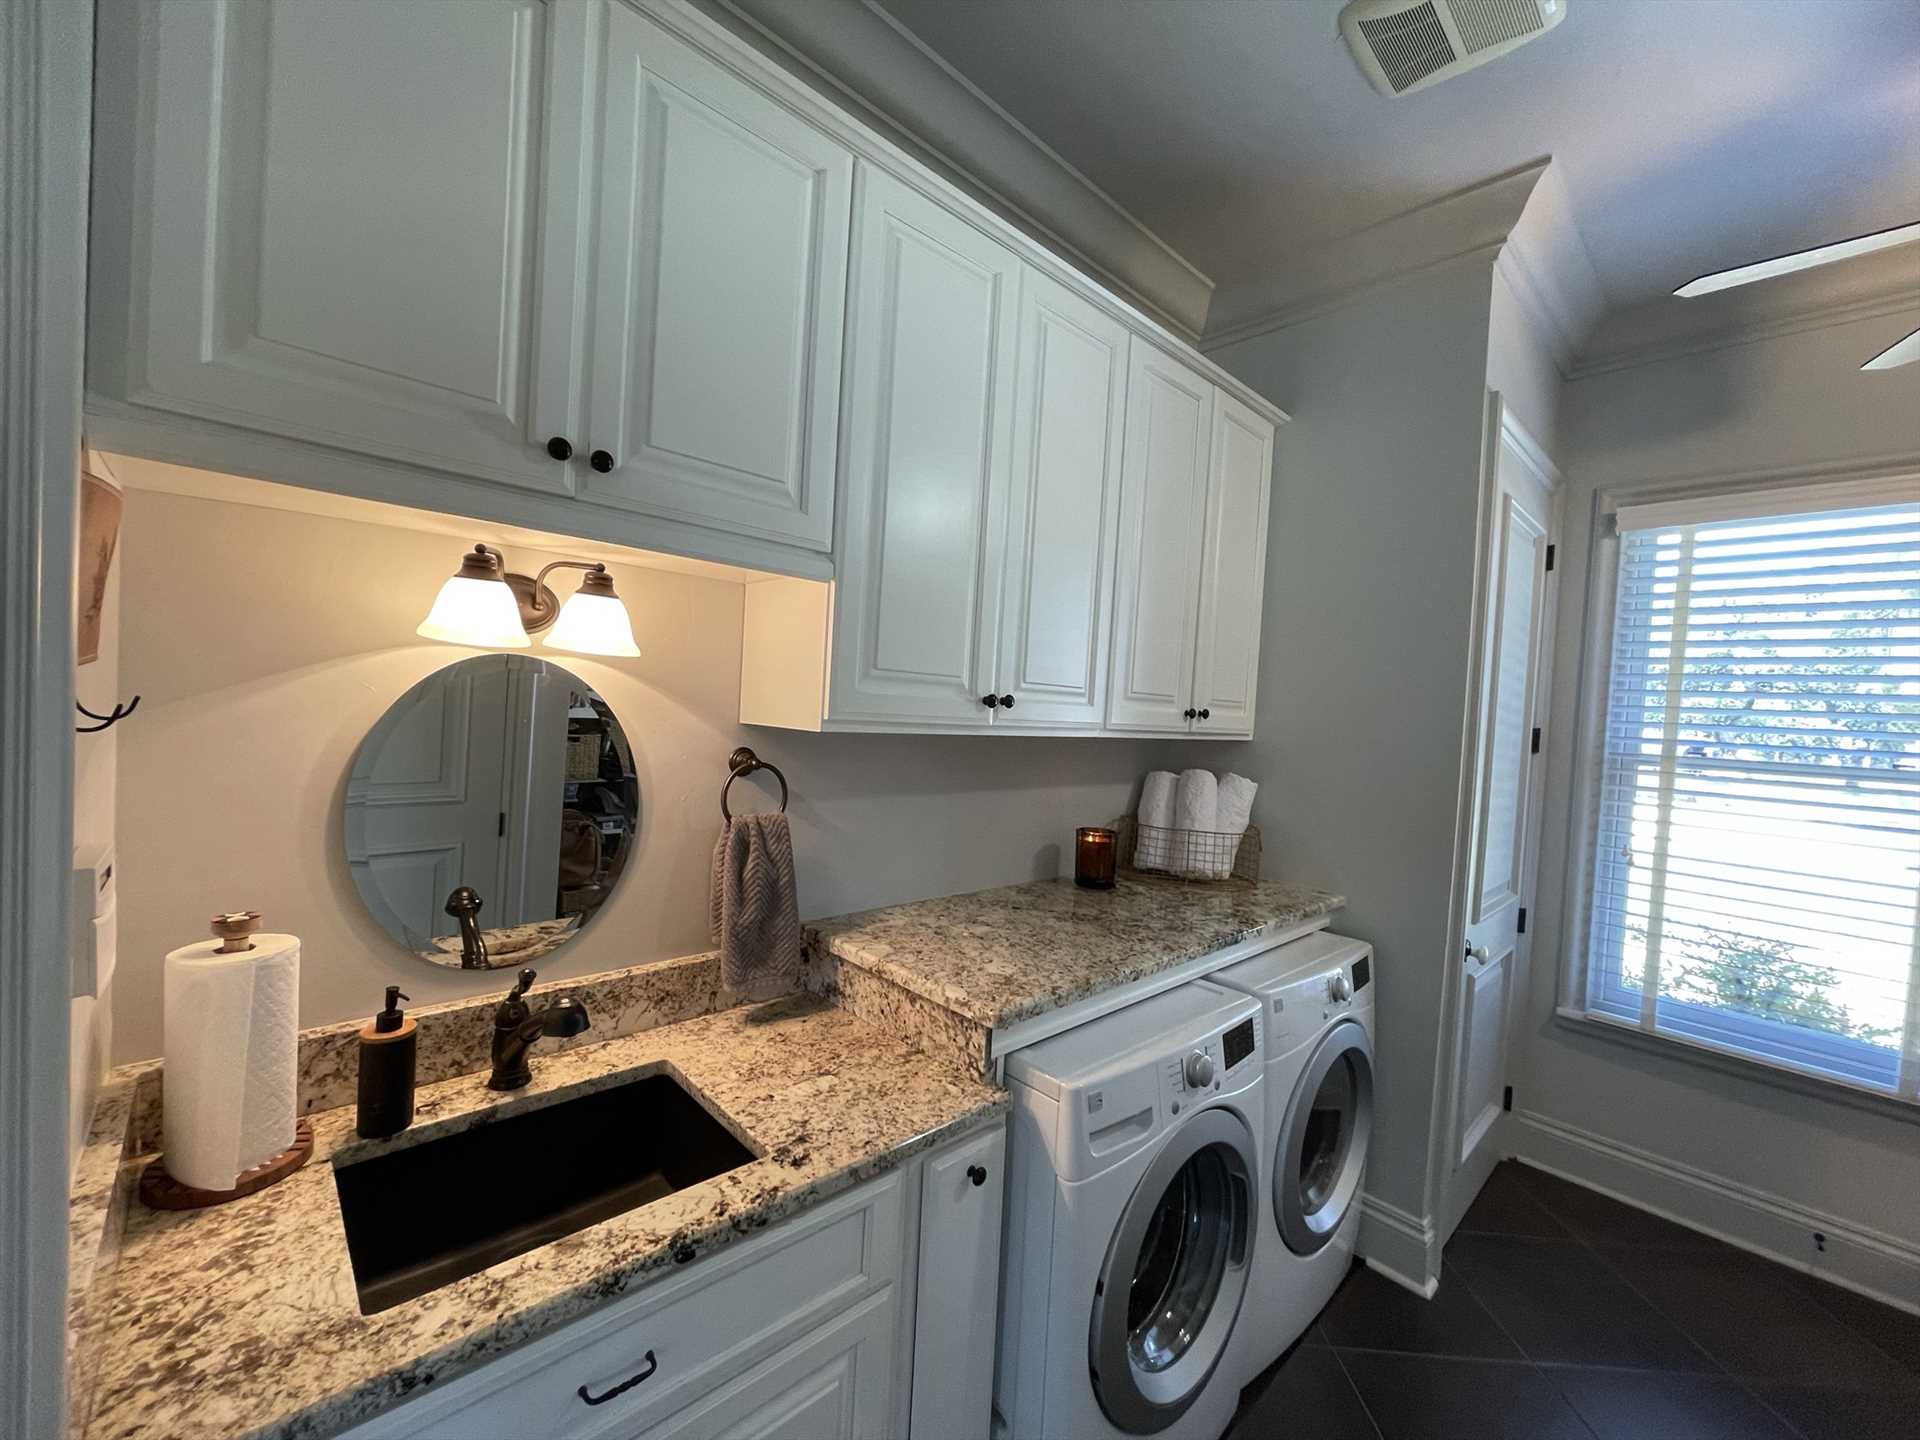                                                 For your cleanup convenience, LaGaye Ranch includes a utility room with a spanking-new washer and dryer!